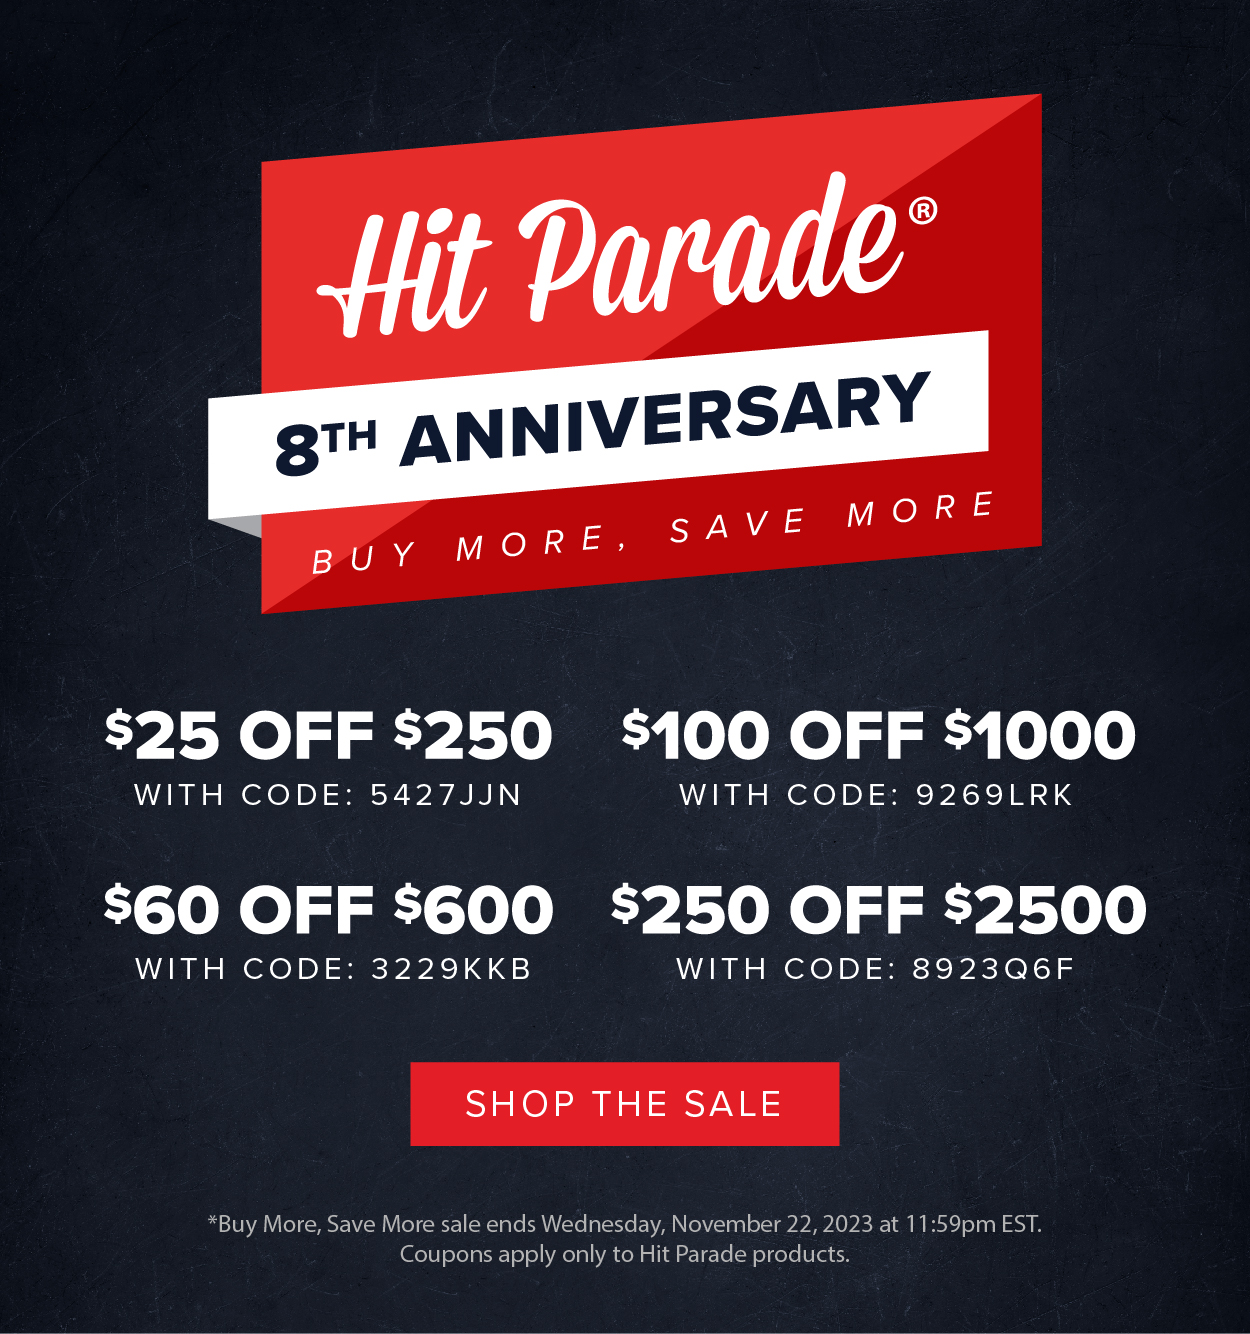 Hit Parade's 8th Anniversary Buy More, Save More Sale